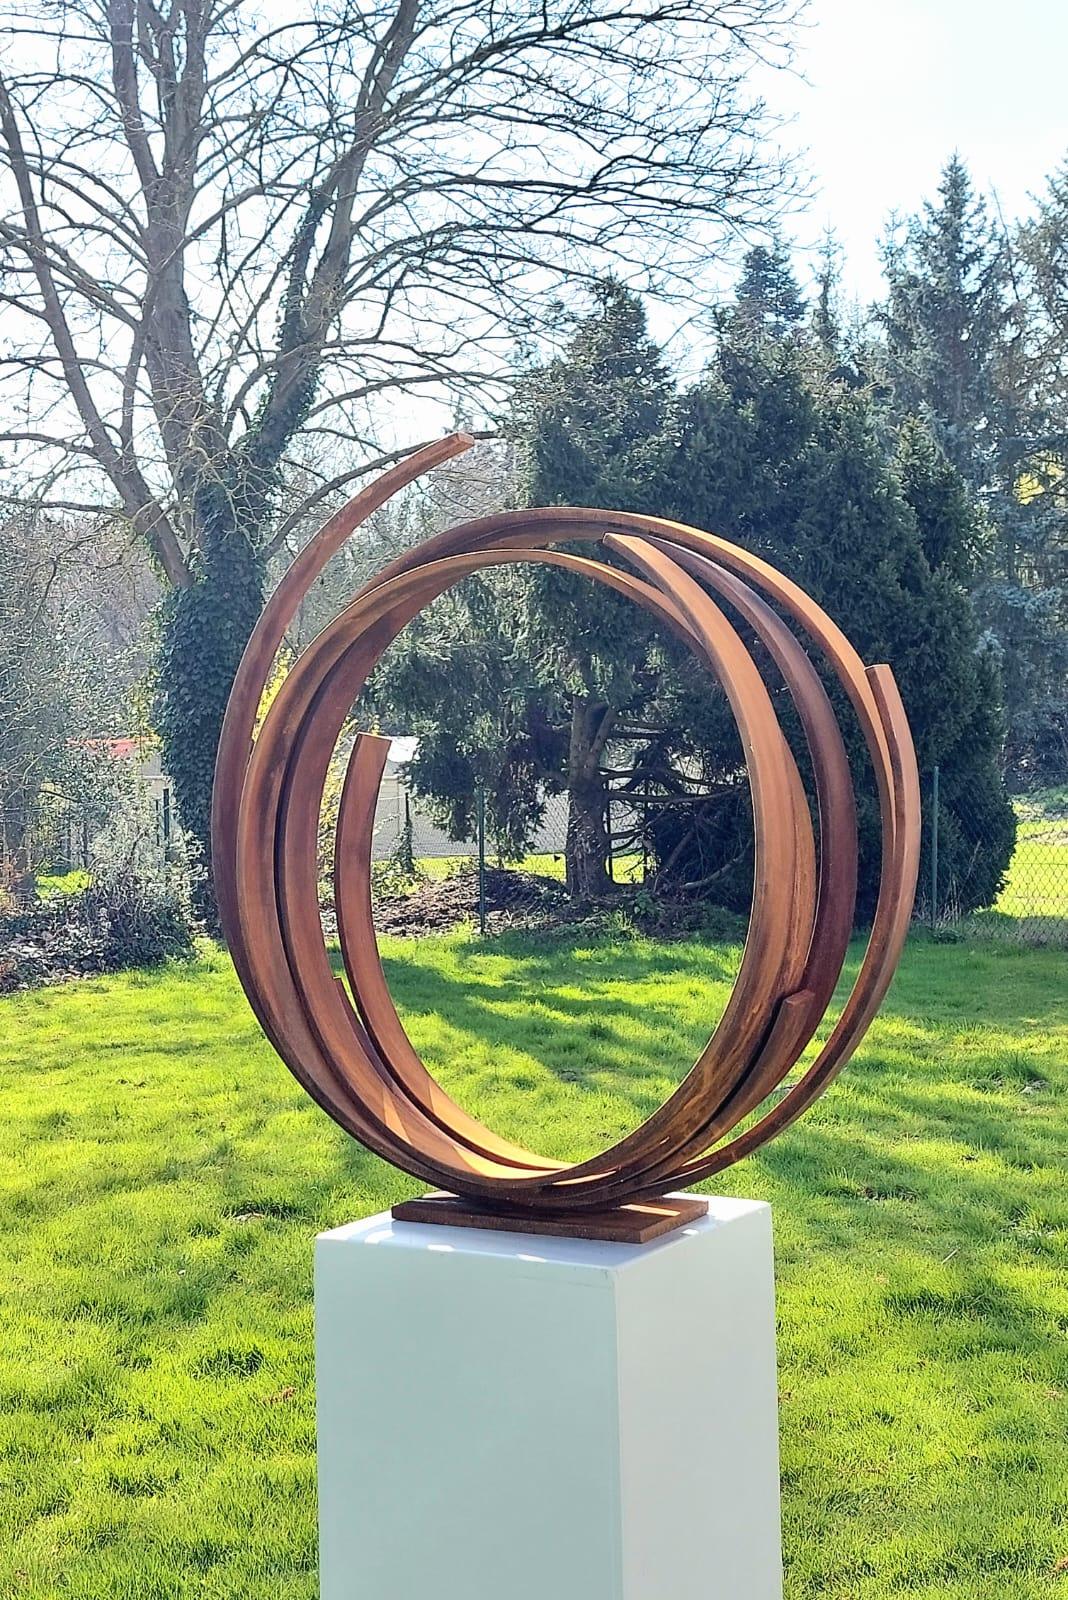 Steel Orbit by Kuno Vollet - Contemporary Rusted sculpture for Outdoors